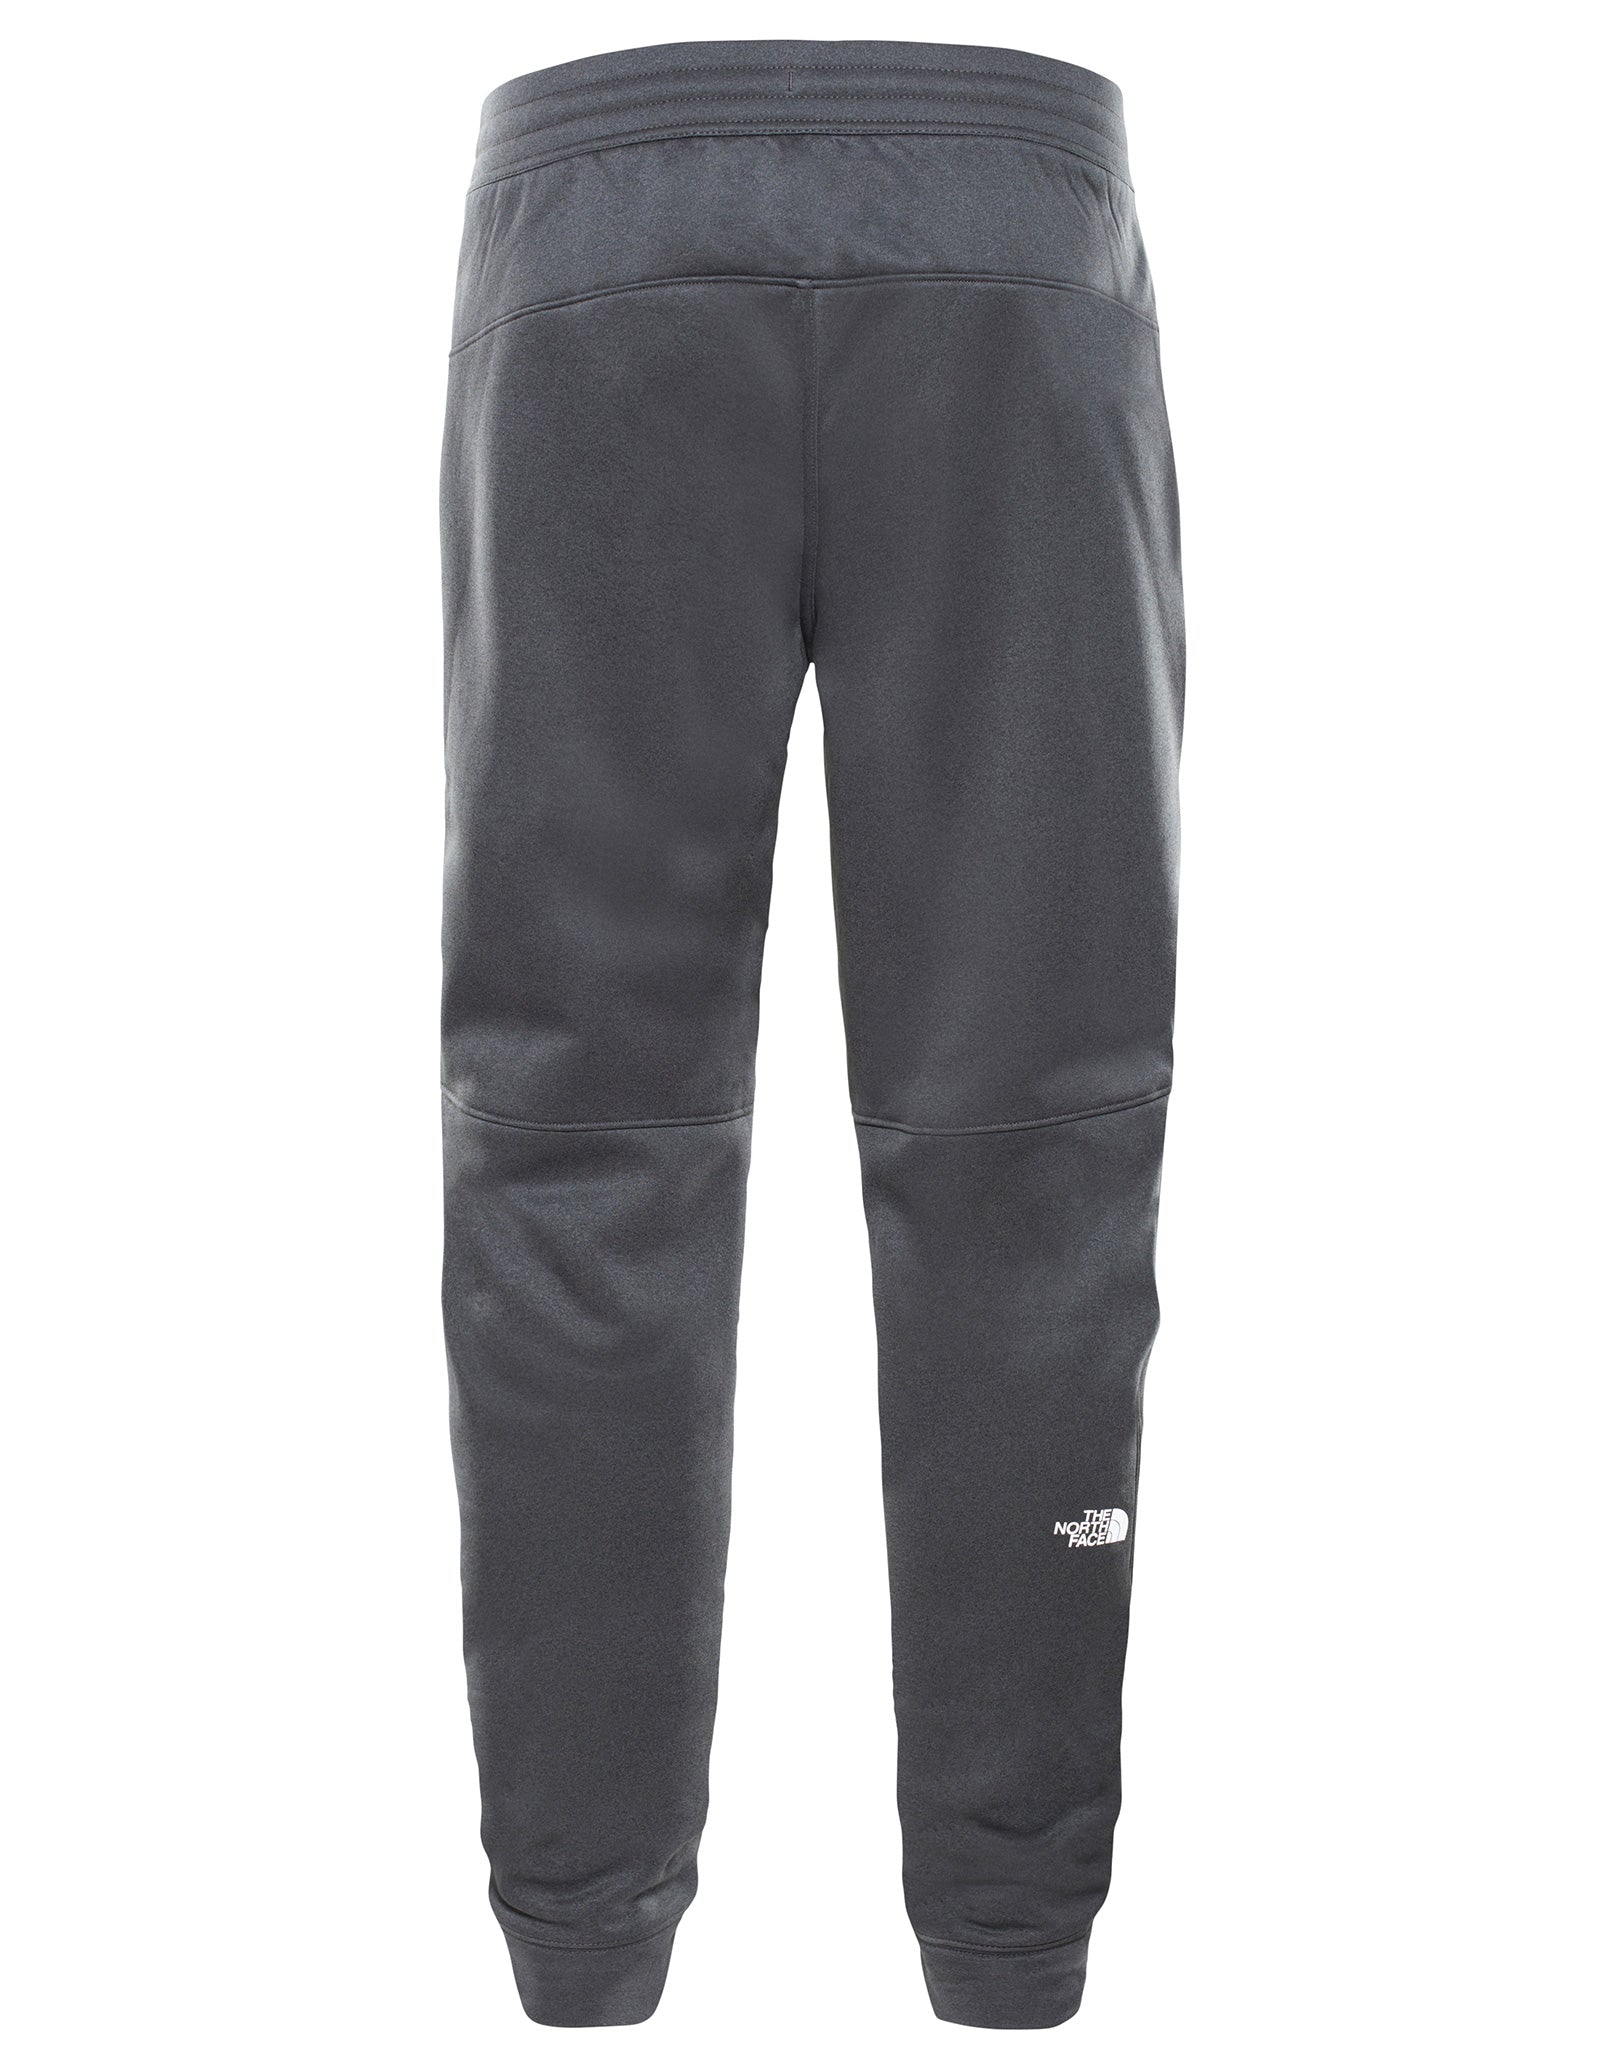 north face bottoms mens